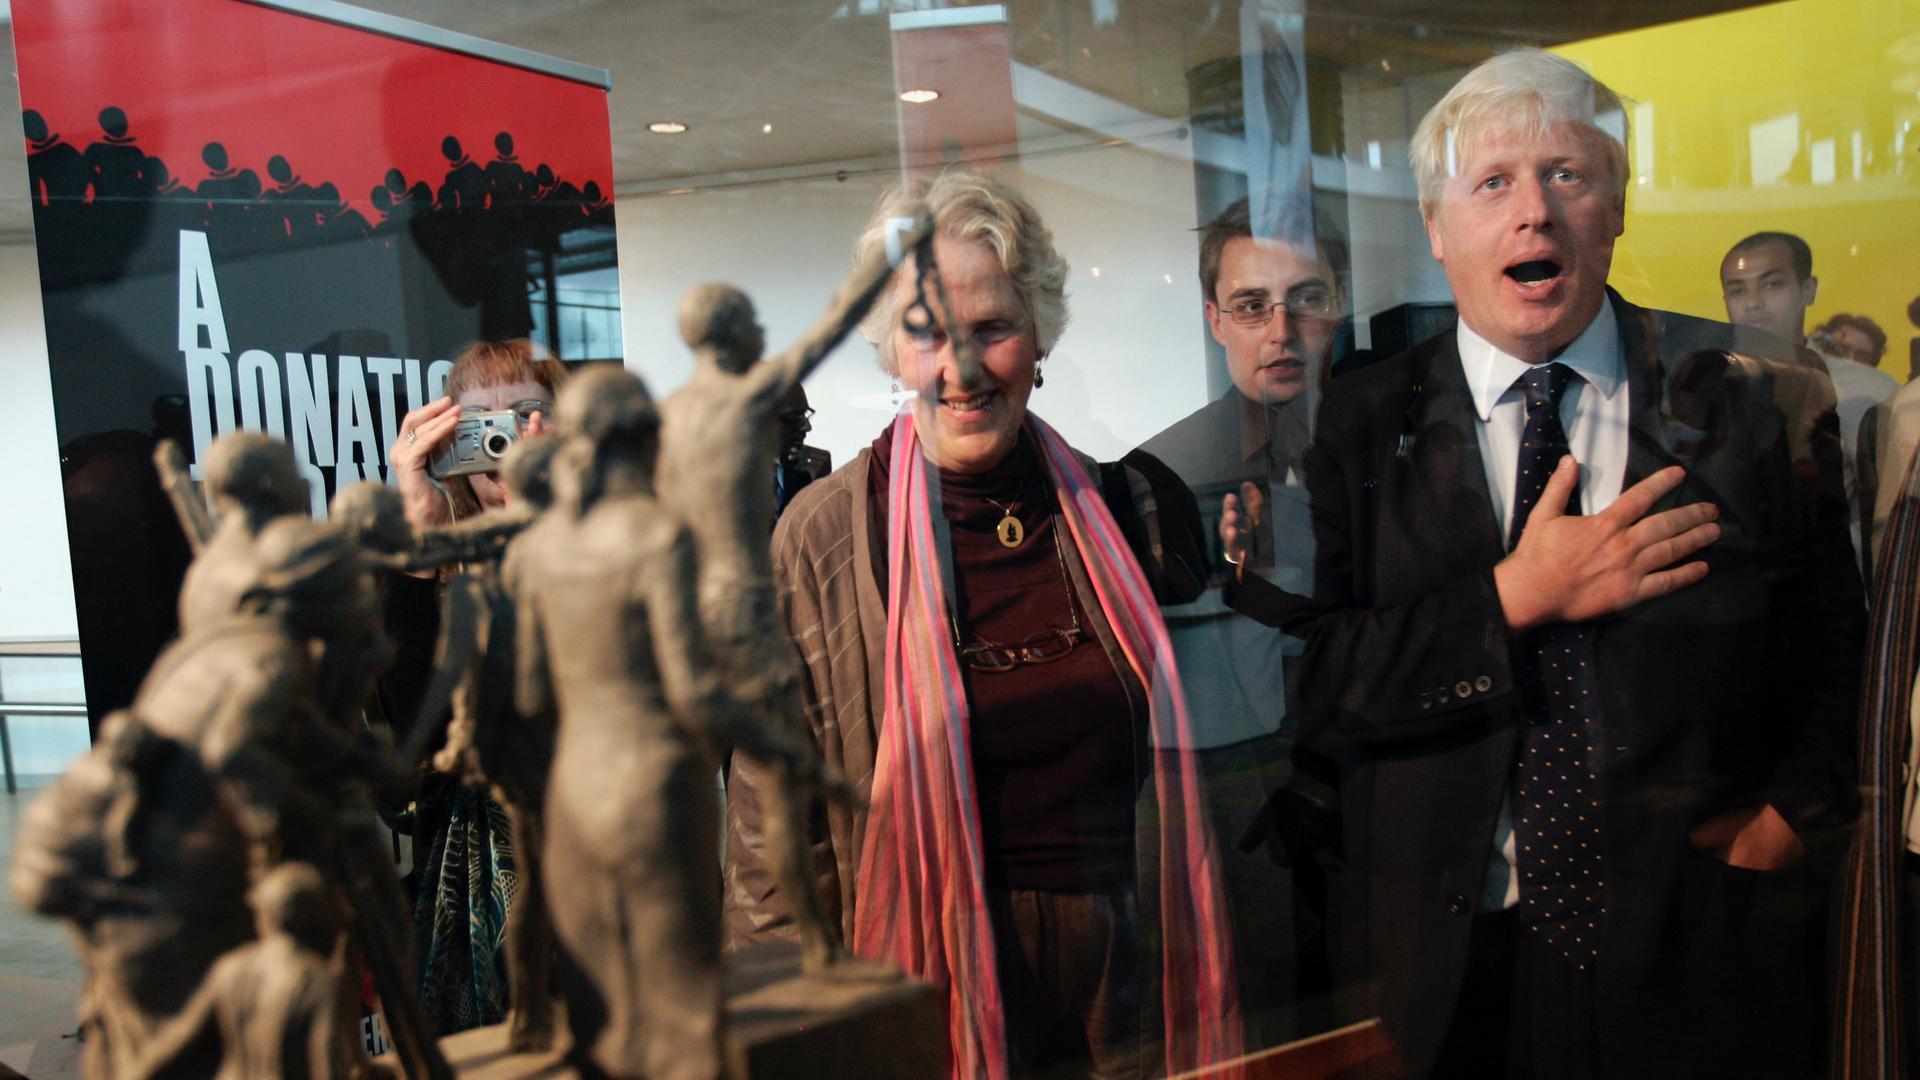 Former mayor of London Boris Johnson, right, is seen by a maquette of a statue that stands as a permanent slavery memorial statue at City Hall in London, Aug. 18, 2008.